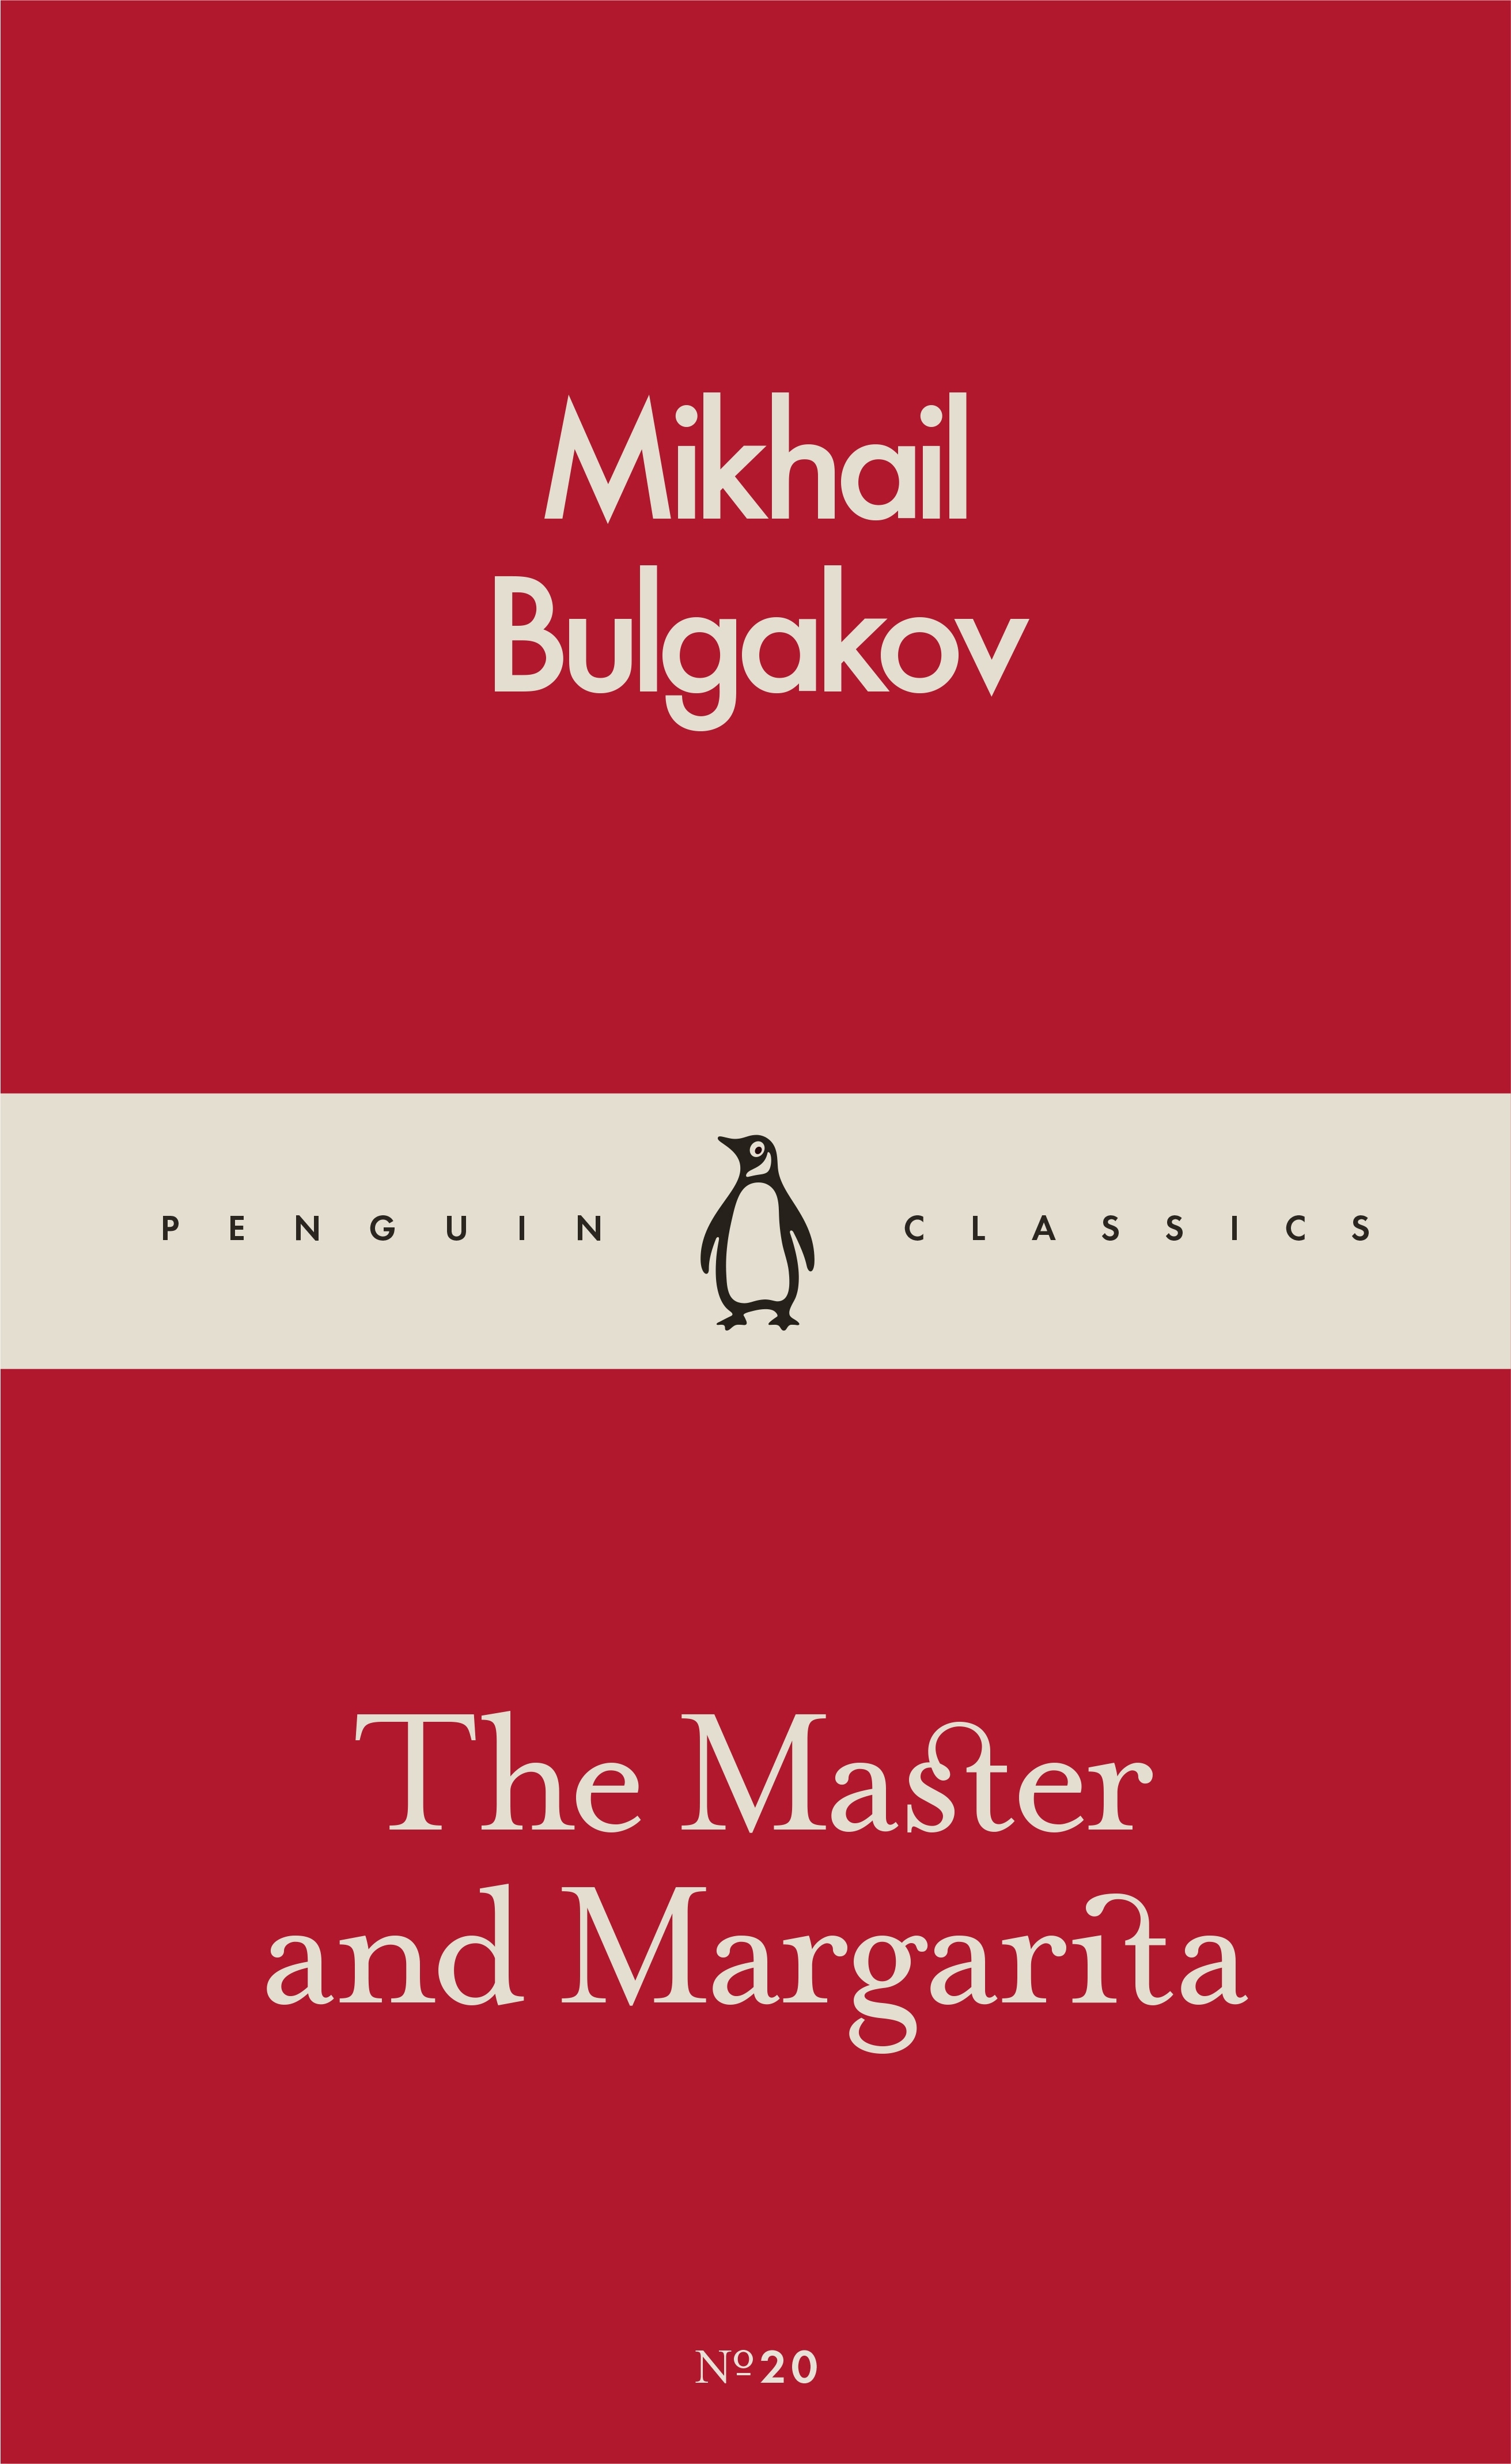 Book “The Master And Margarita” by Mikhail Bulgakov — May 26, 2016